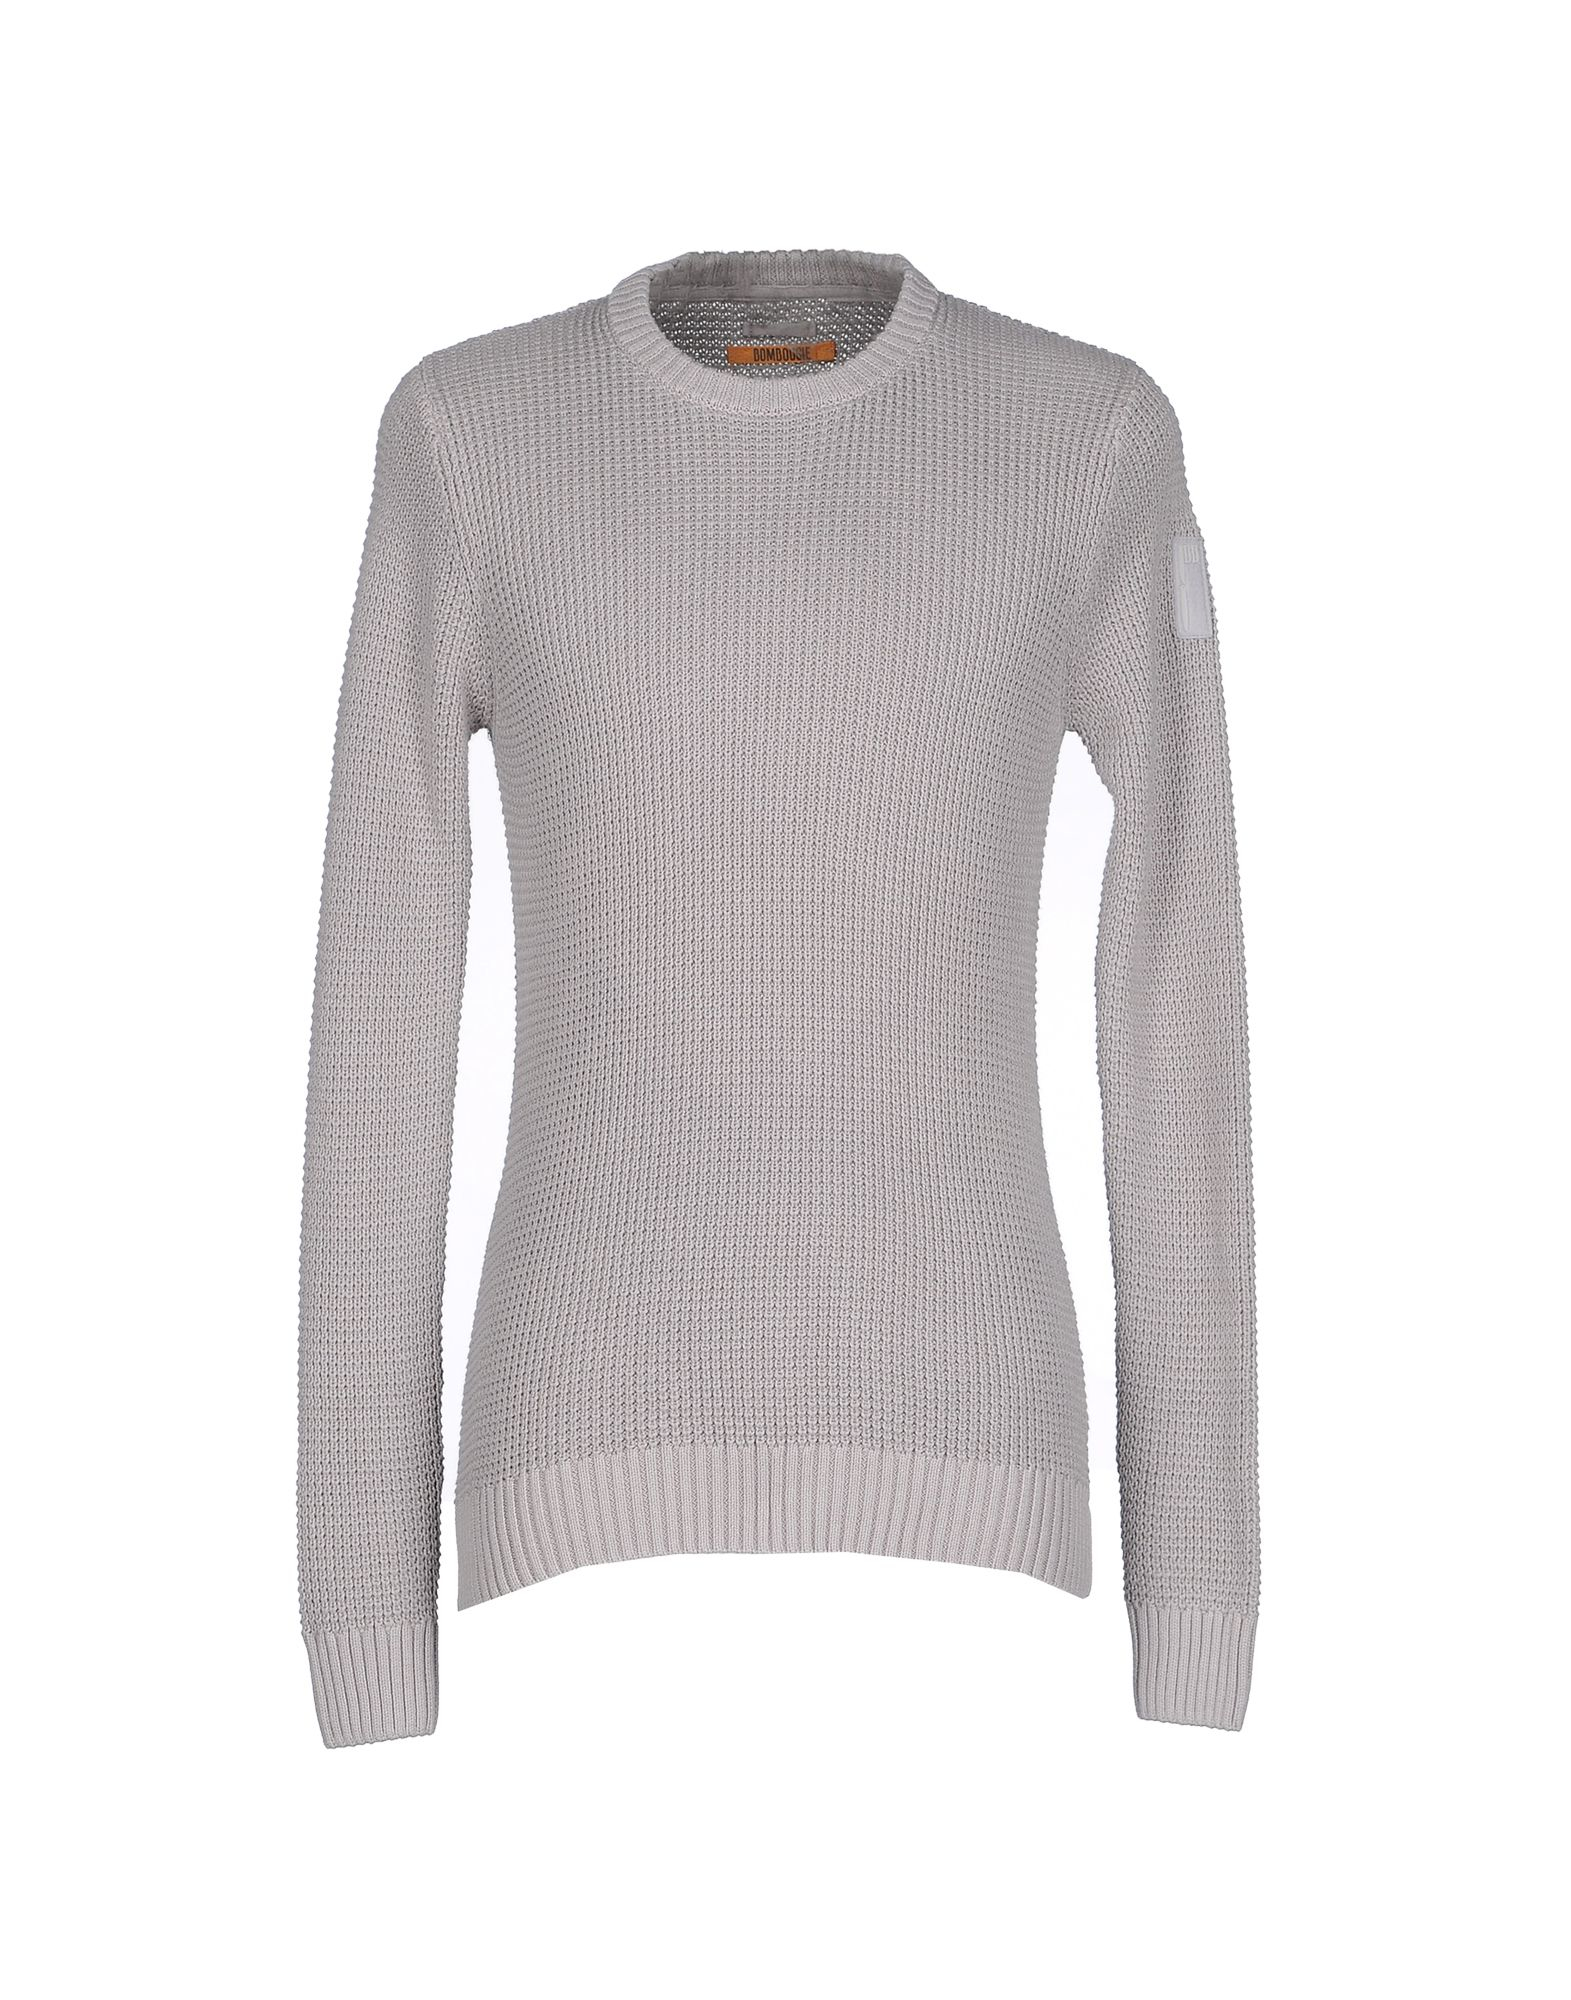 Bomboogie Cotton Sweaters in Grey (Gray) for Men - Lyst